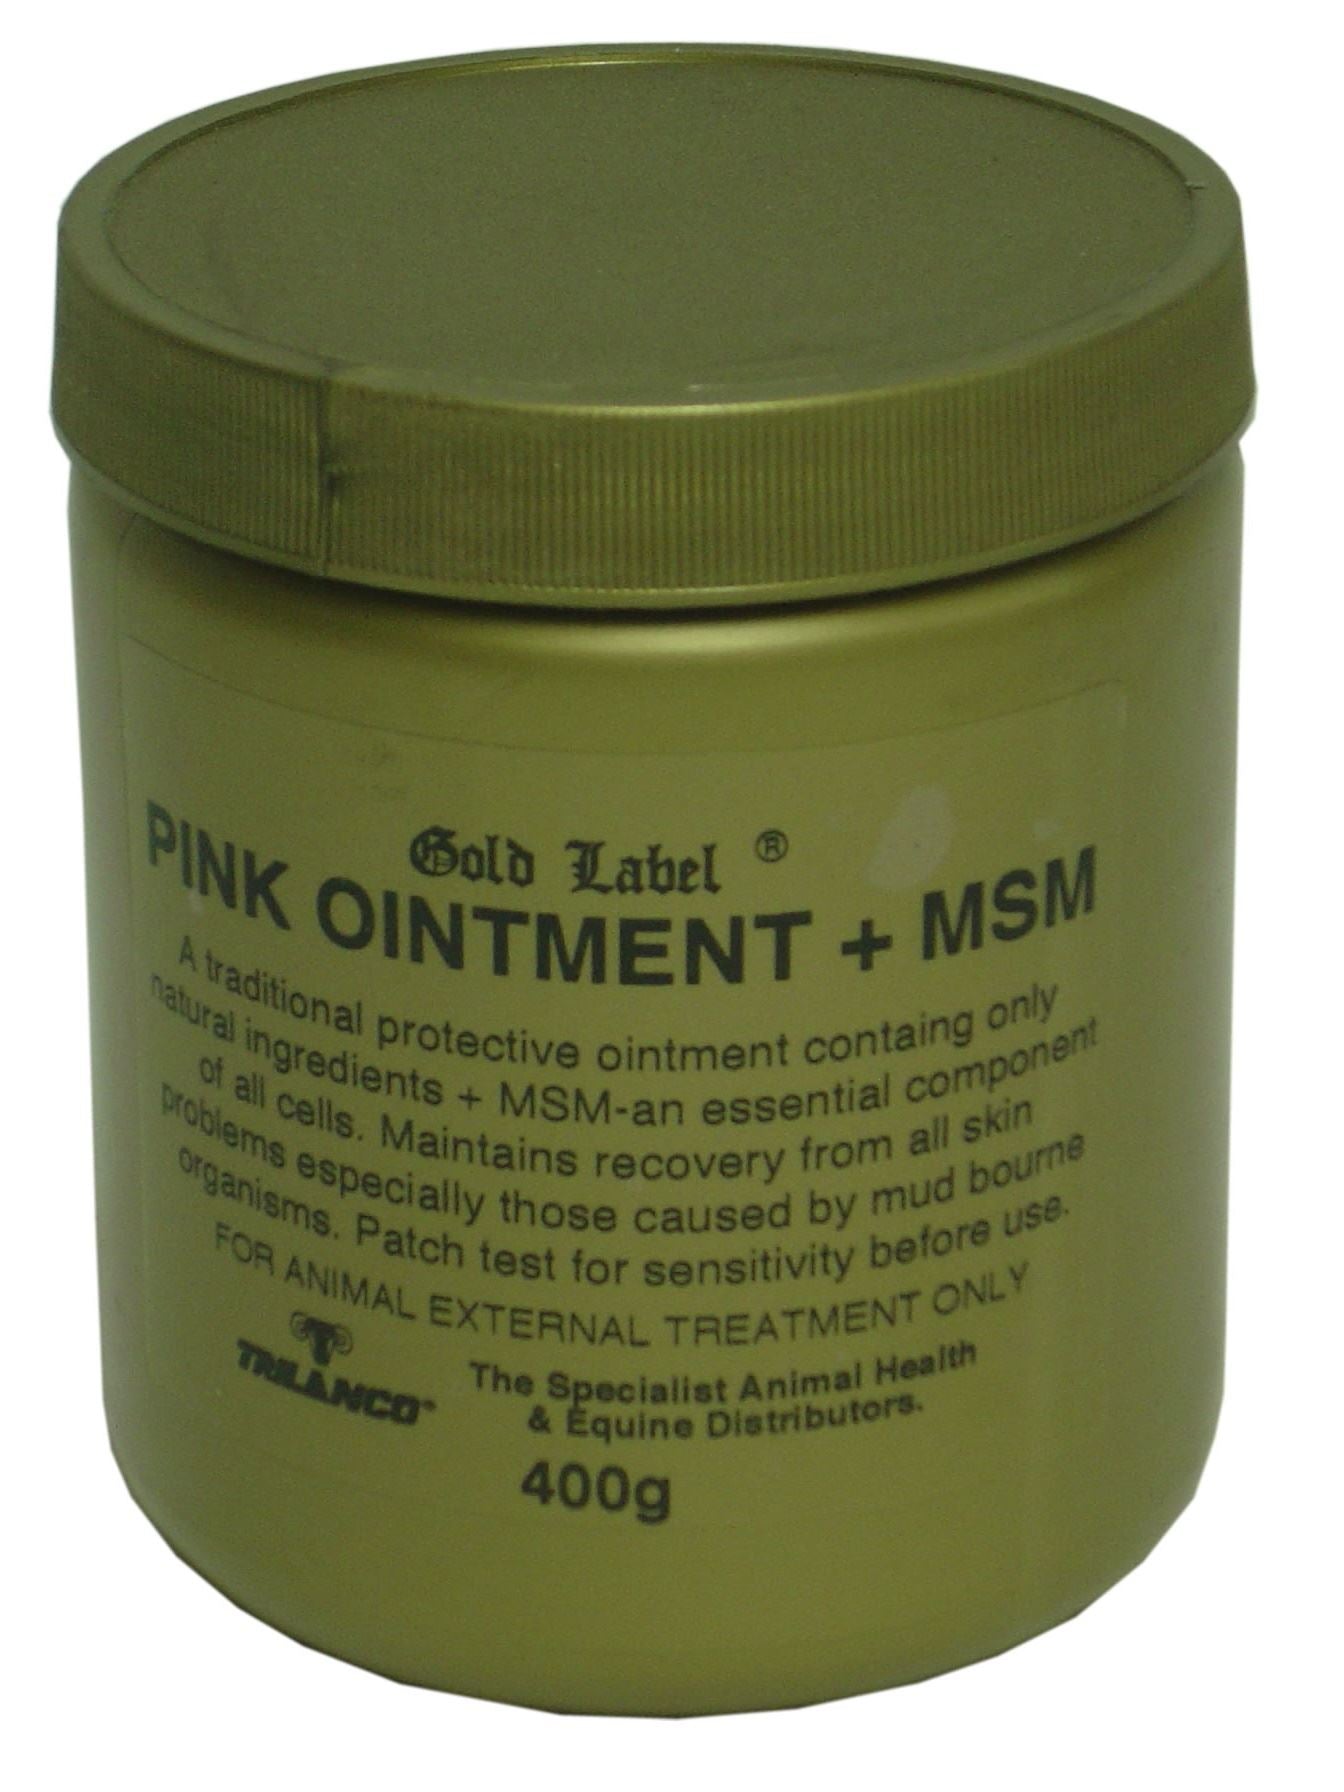 Gold Label Pink Ointment + Msm - Just Horse Riders